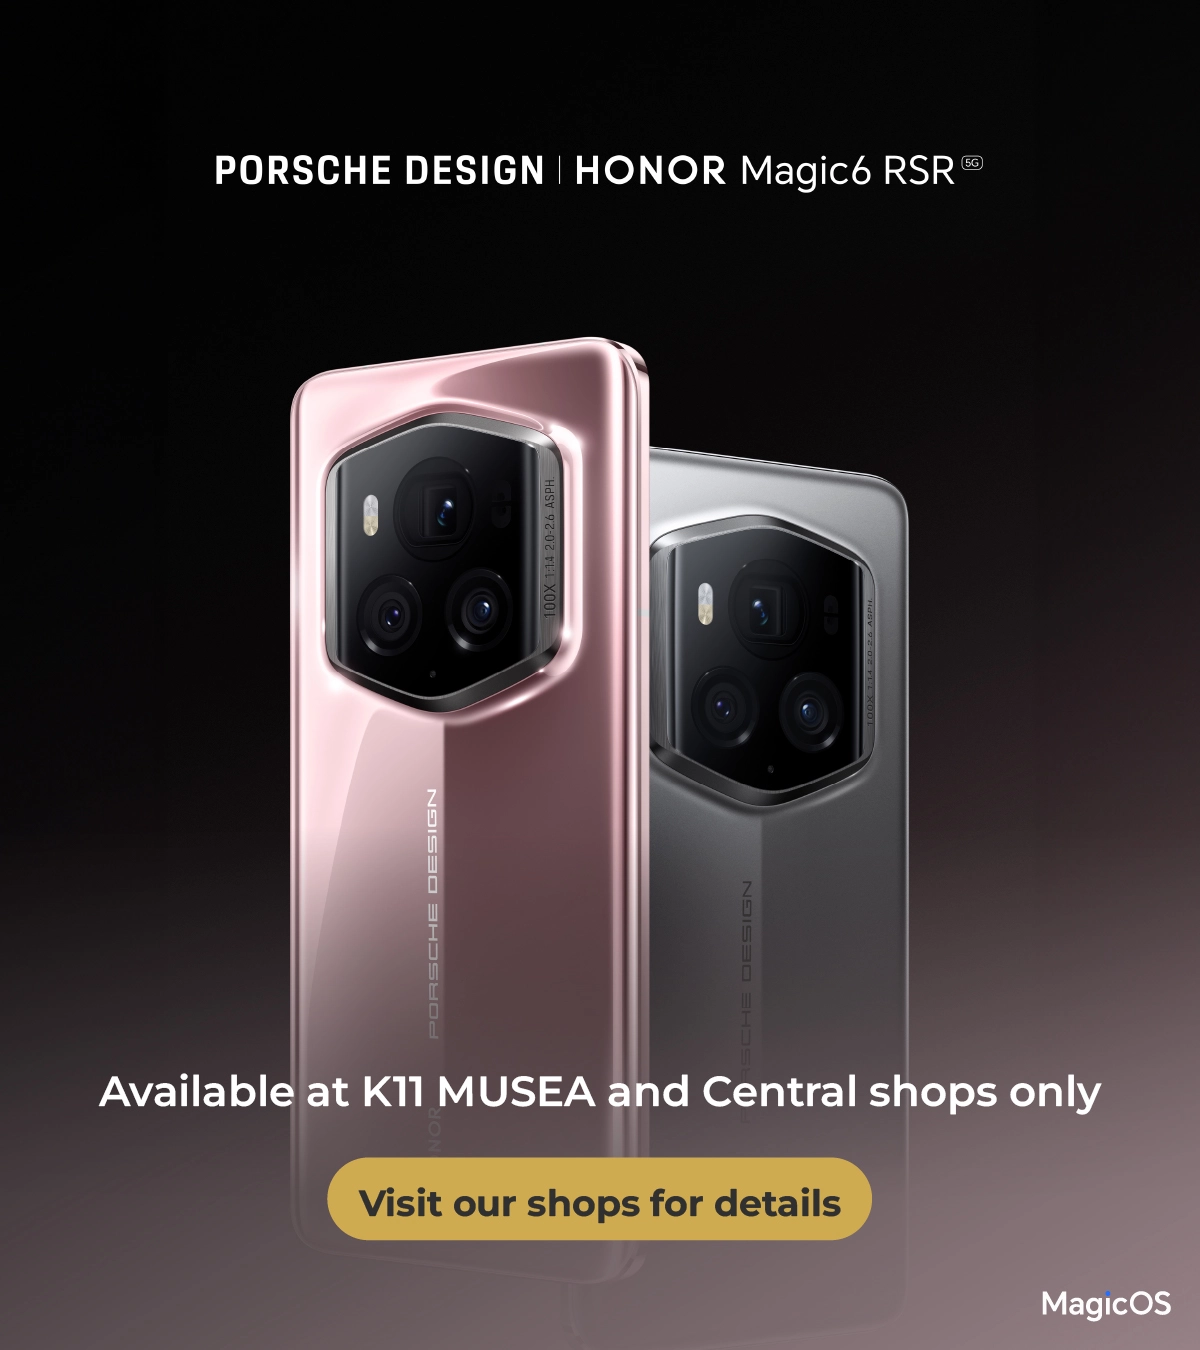 $0 Handset price, monthly fee $348 to enjoy PORSCHE DESIGN HONOR Magic6 RSR 5G, Free delivery.